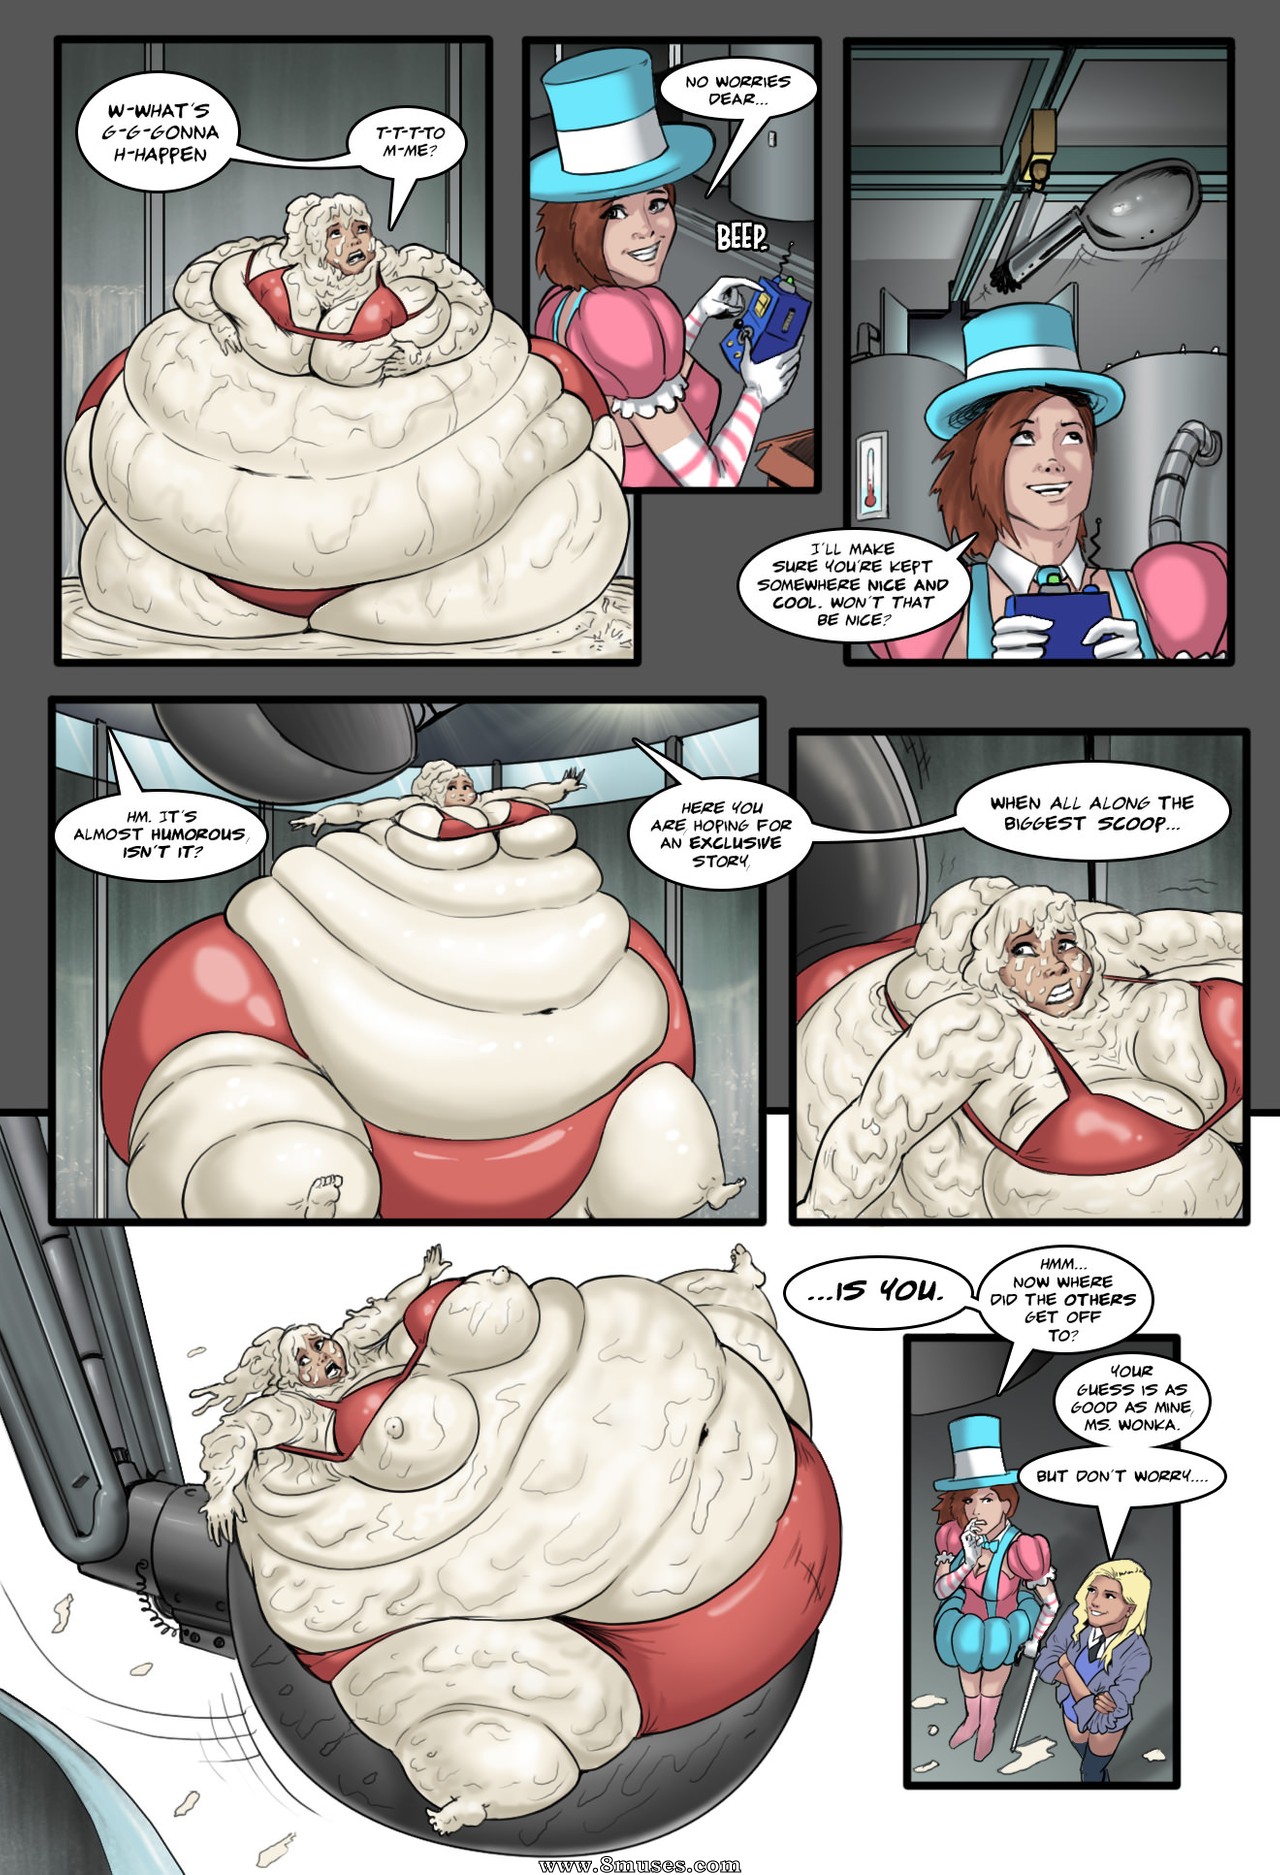 Wendy Wonka and The Chocolate Fetish Factory - 8muses Comics- Free Sex Co.....